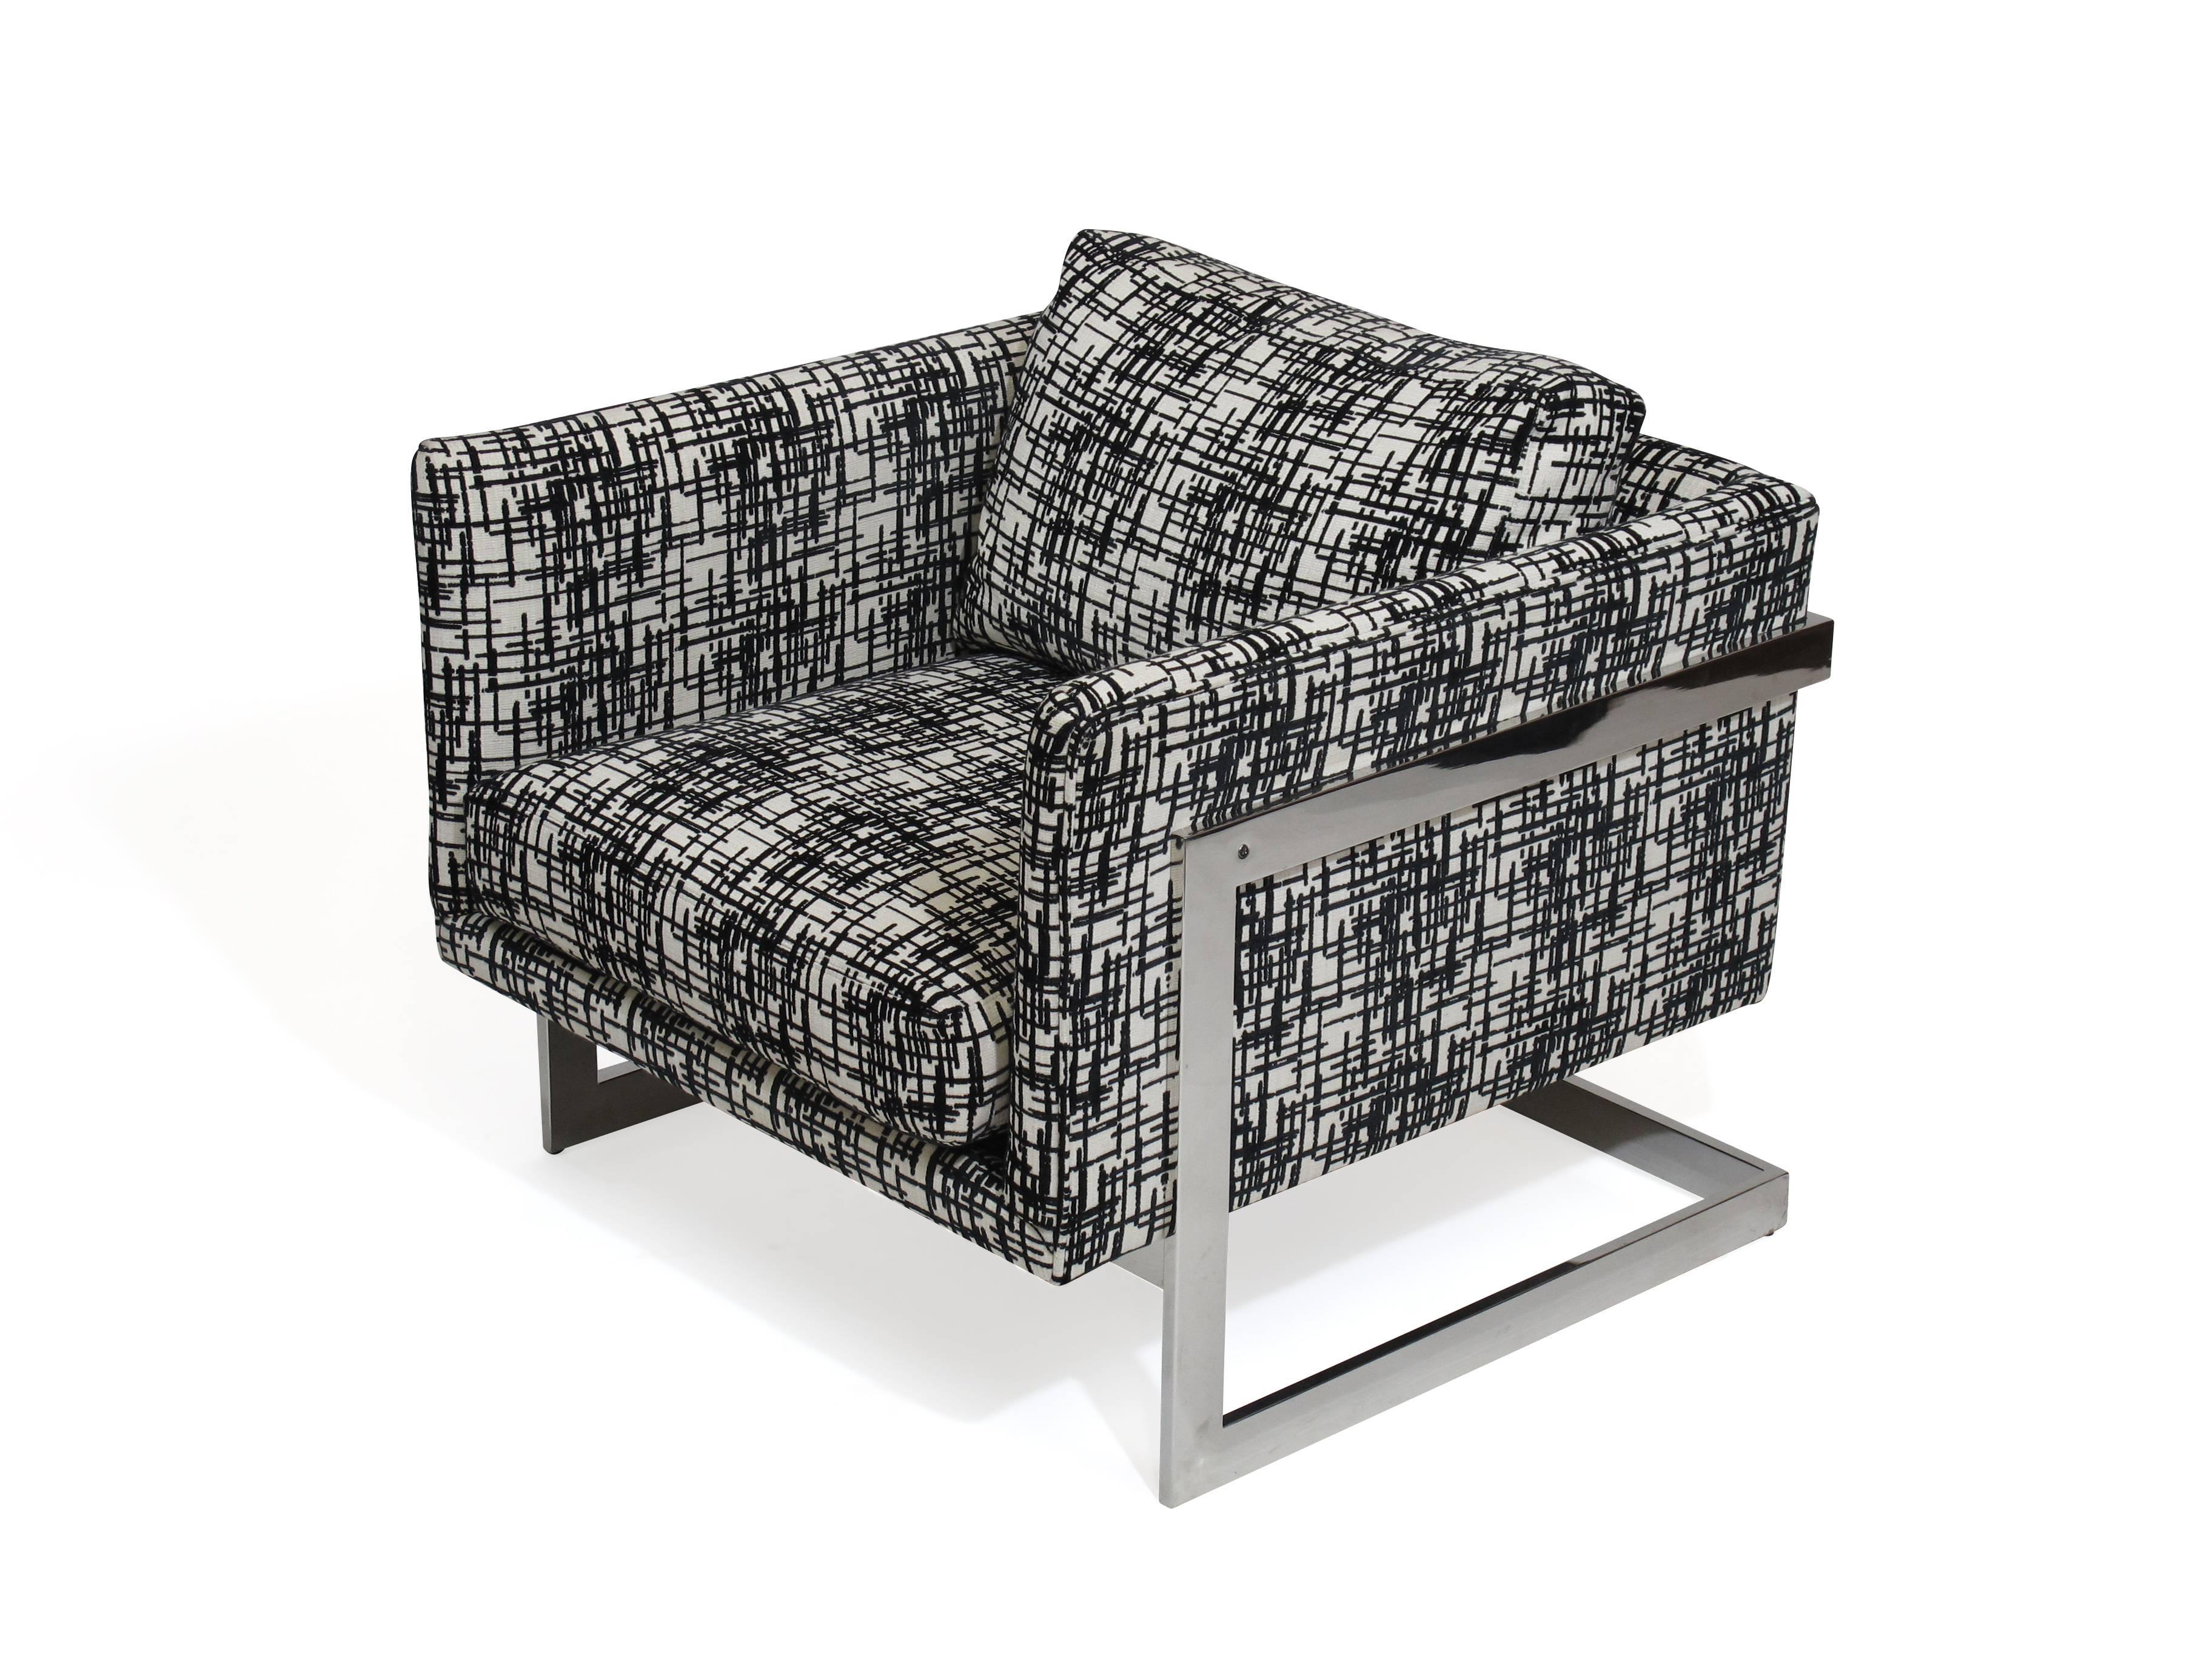 Lounge chair designed by Milo Baughman for Thayer Coggin. Stainless steel frame upholstered in black/white print textile.